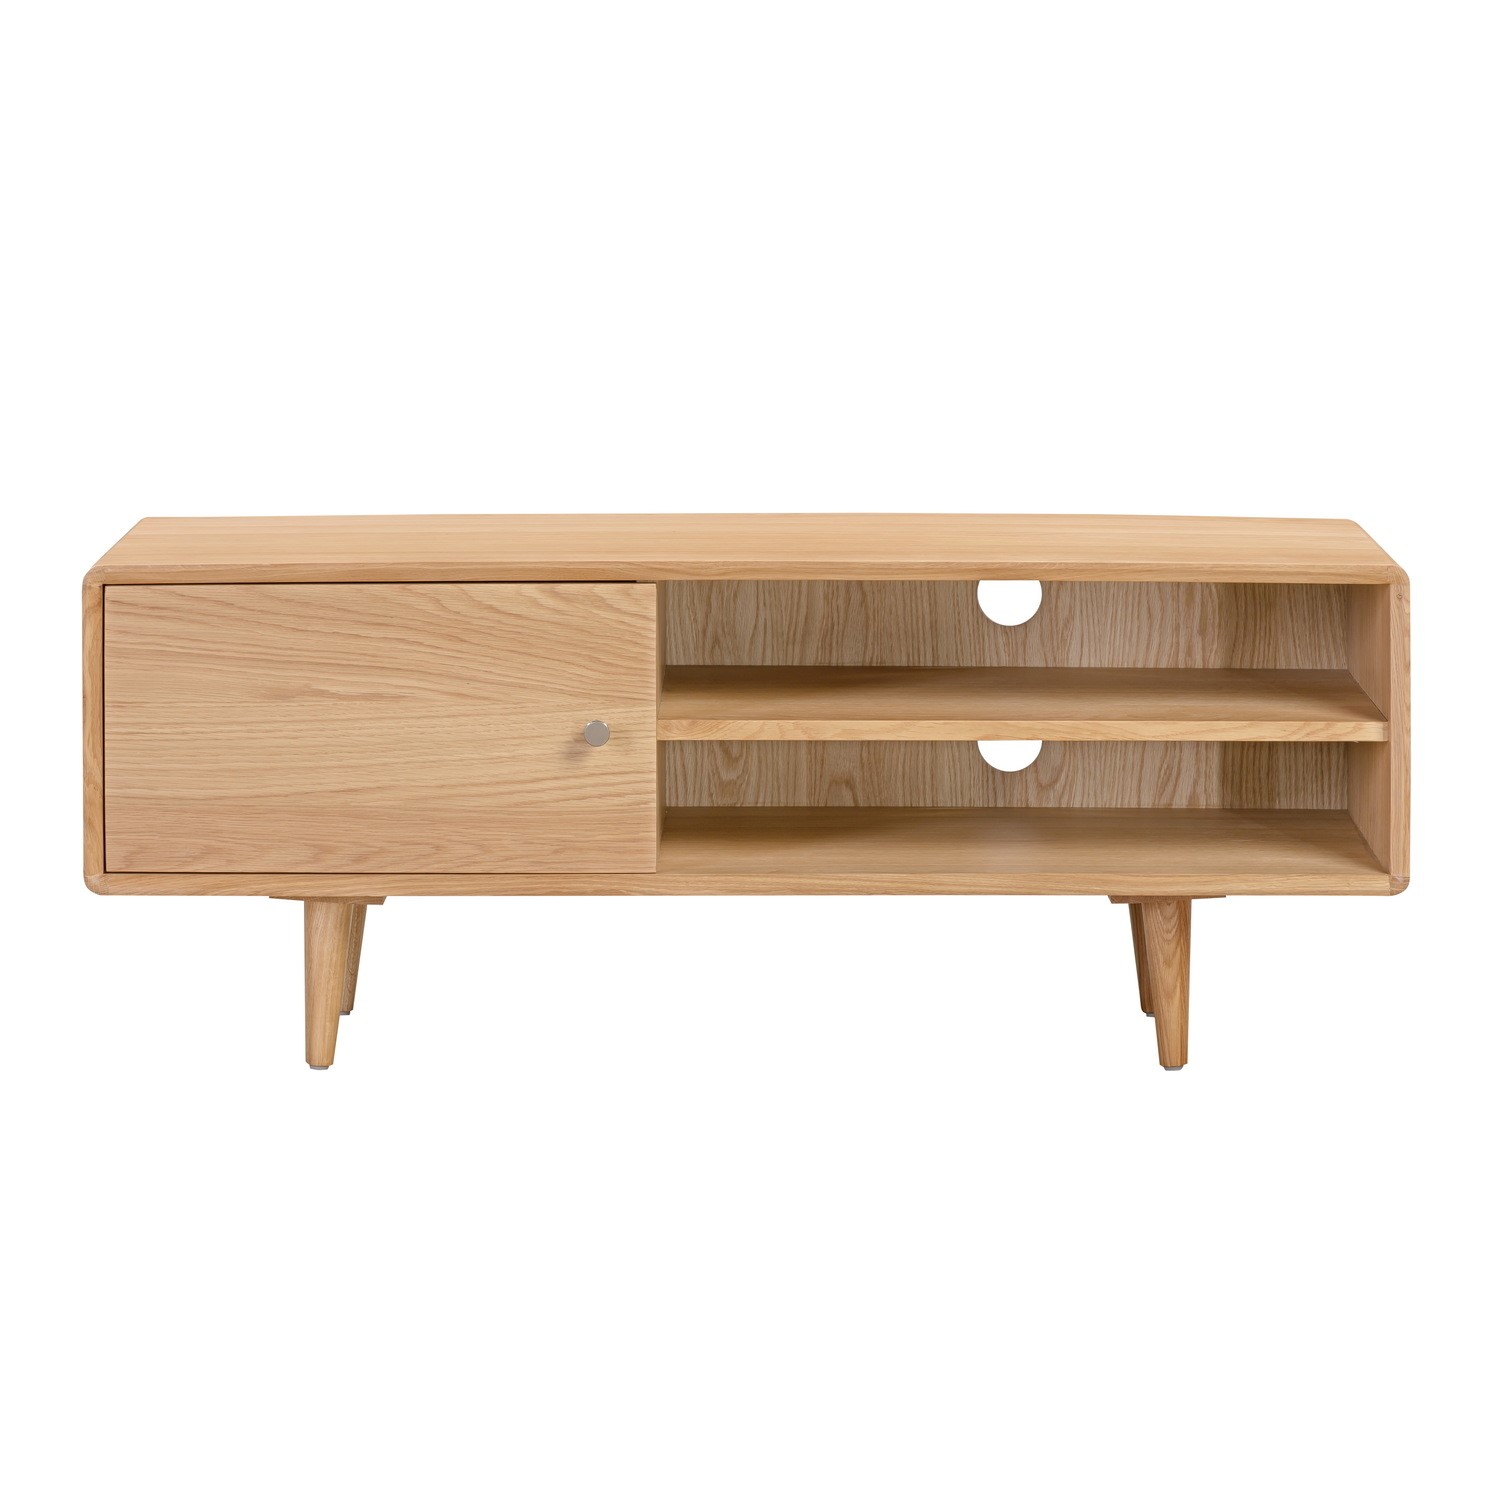 Photo of Small oak tv stand with storage - tvs up to 45 - marny